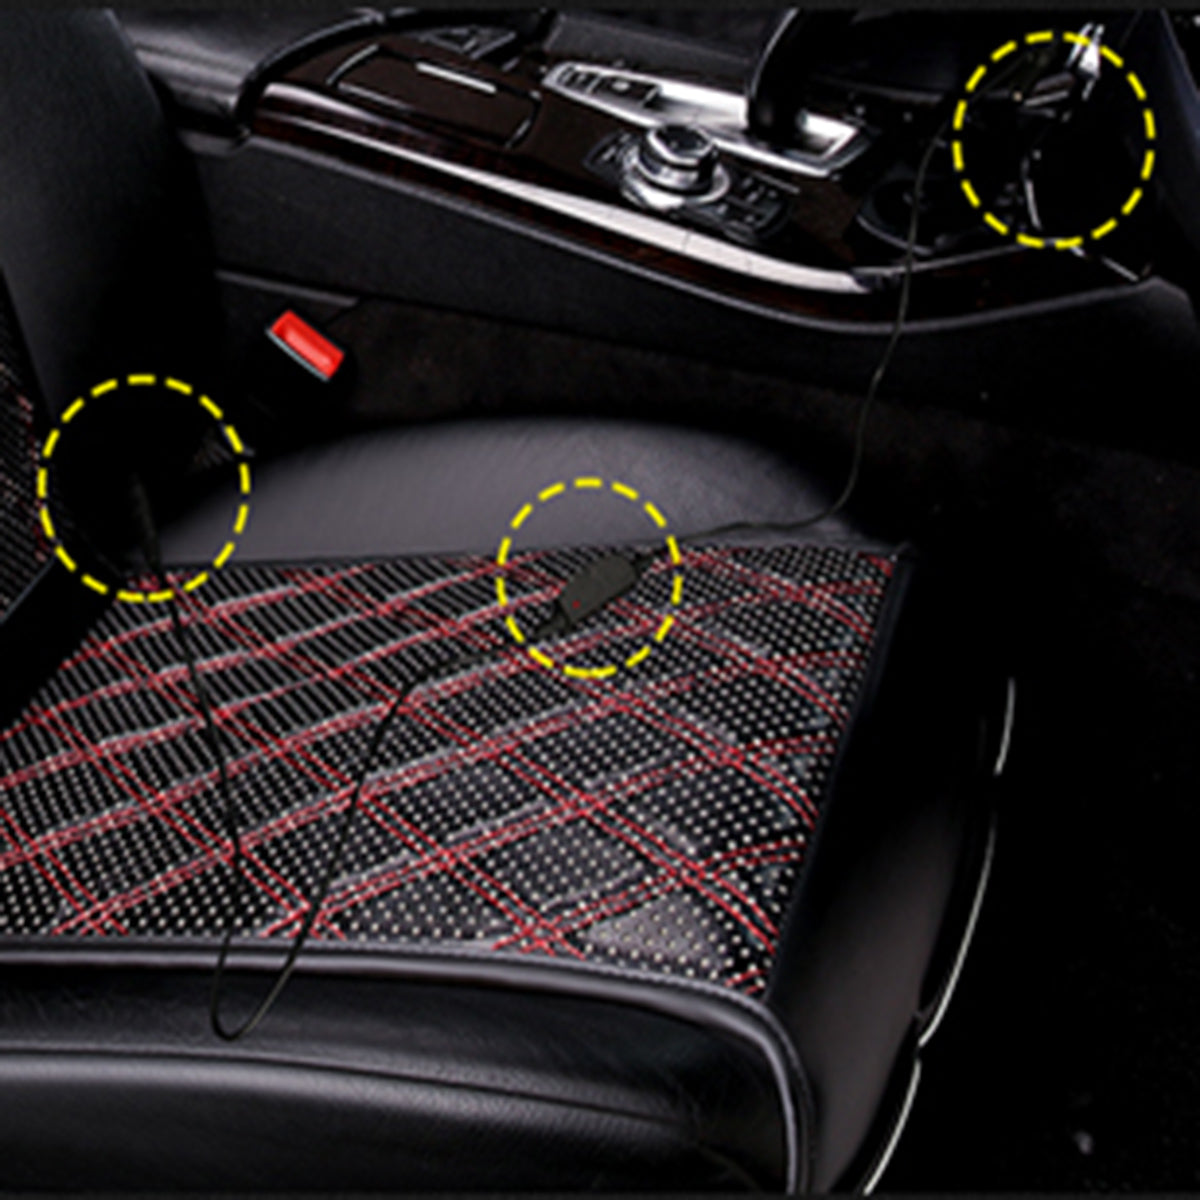 12V Car Heated Seat Cushion Seat Warmer Winter Household Cover Electric Heating Mat Pad - Auto GoShop